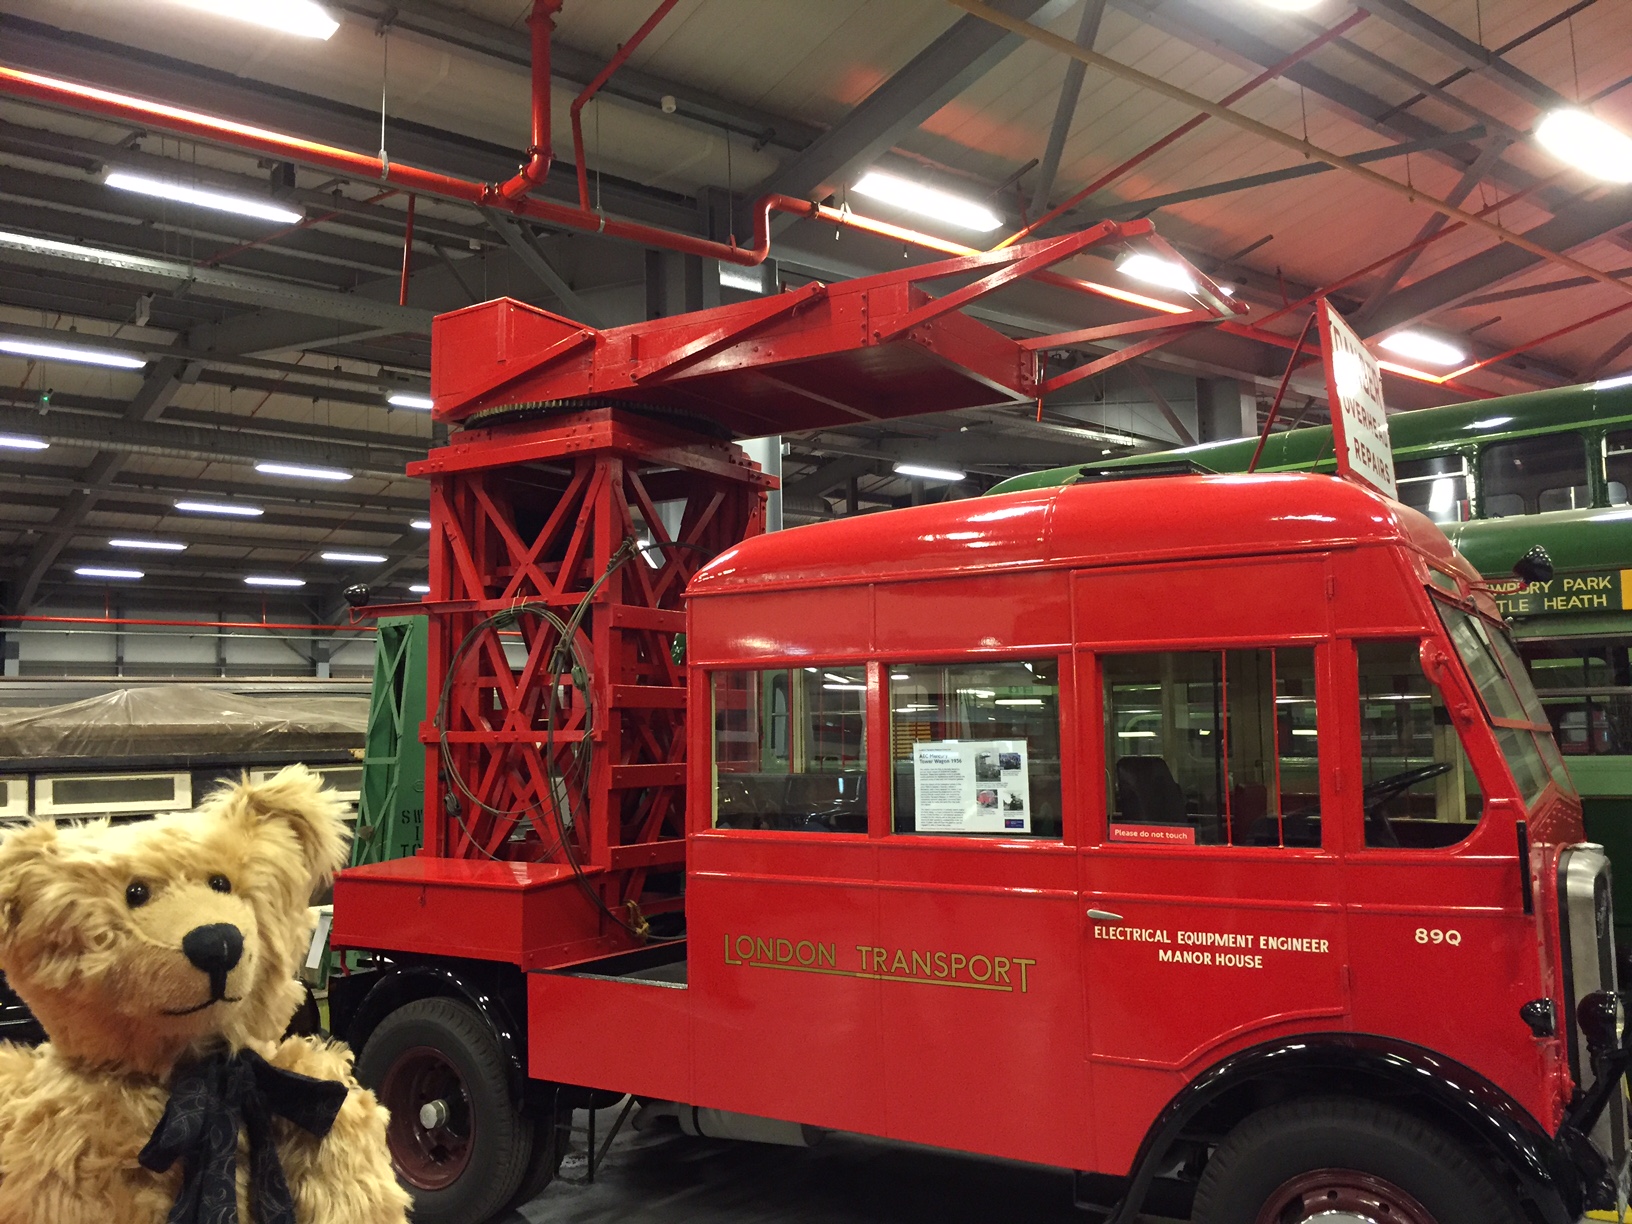 London Transport Museum: Tower vehicle to service overhead lines.